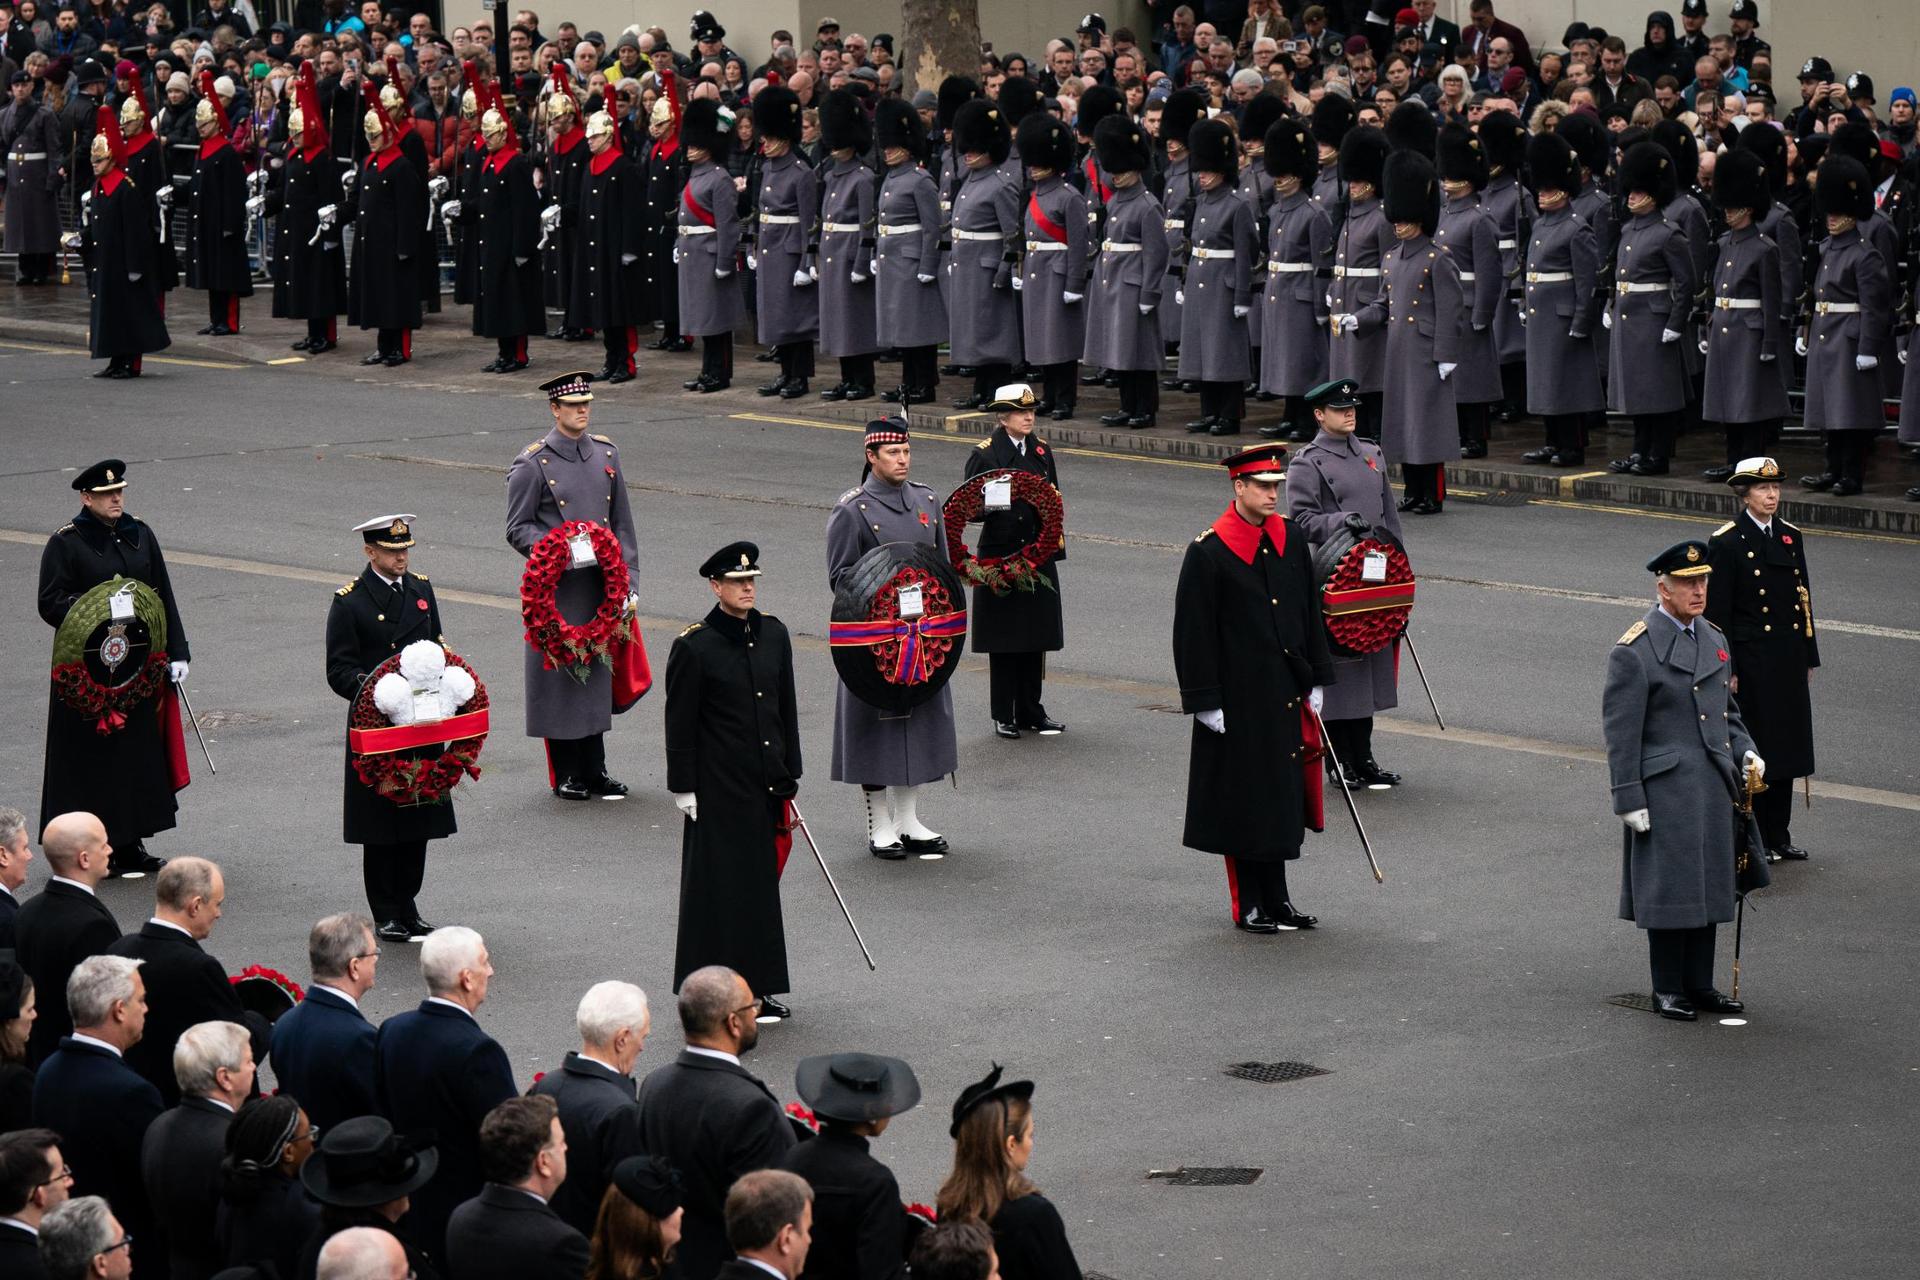 Members of the Royal Family, including King Charles III, the Prince of Wales, the Duke of Edinburgh and the Princess Royal during the Remembrance Sunday service at the Cenotaph in London. 